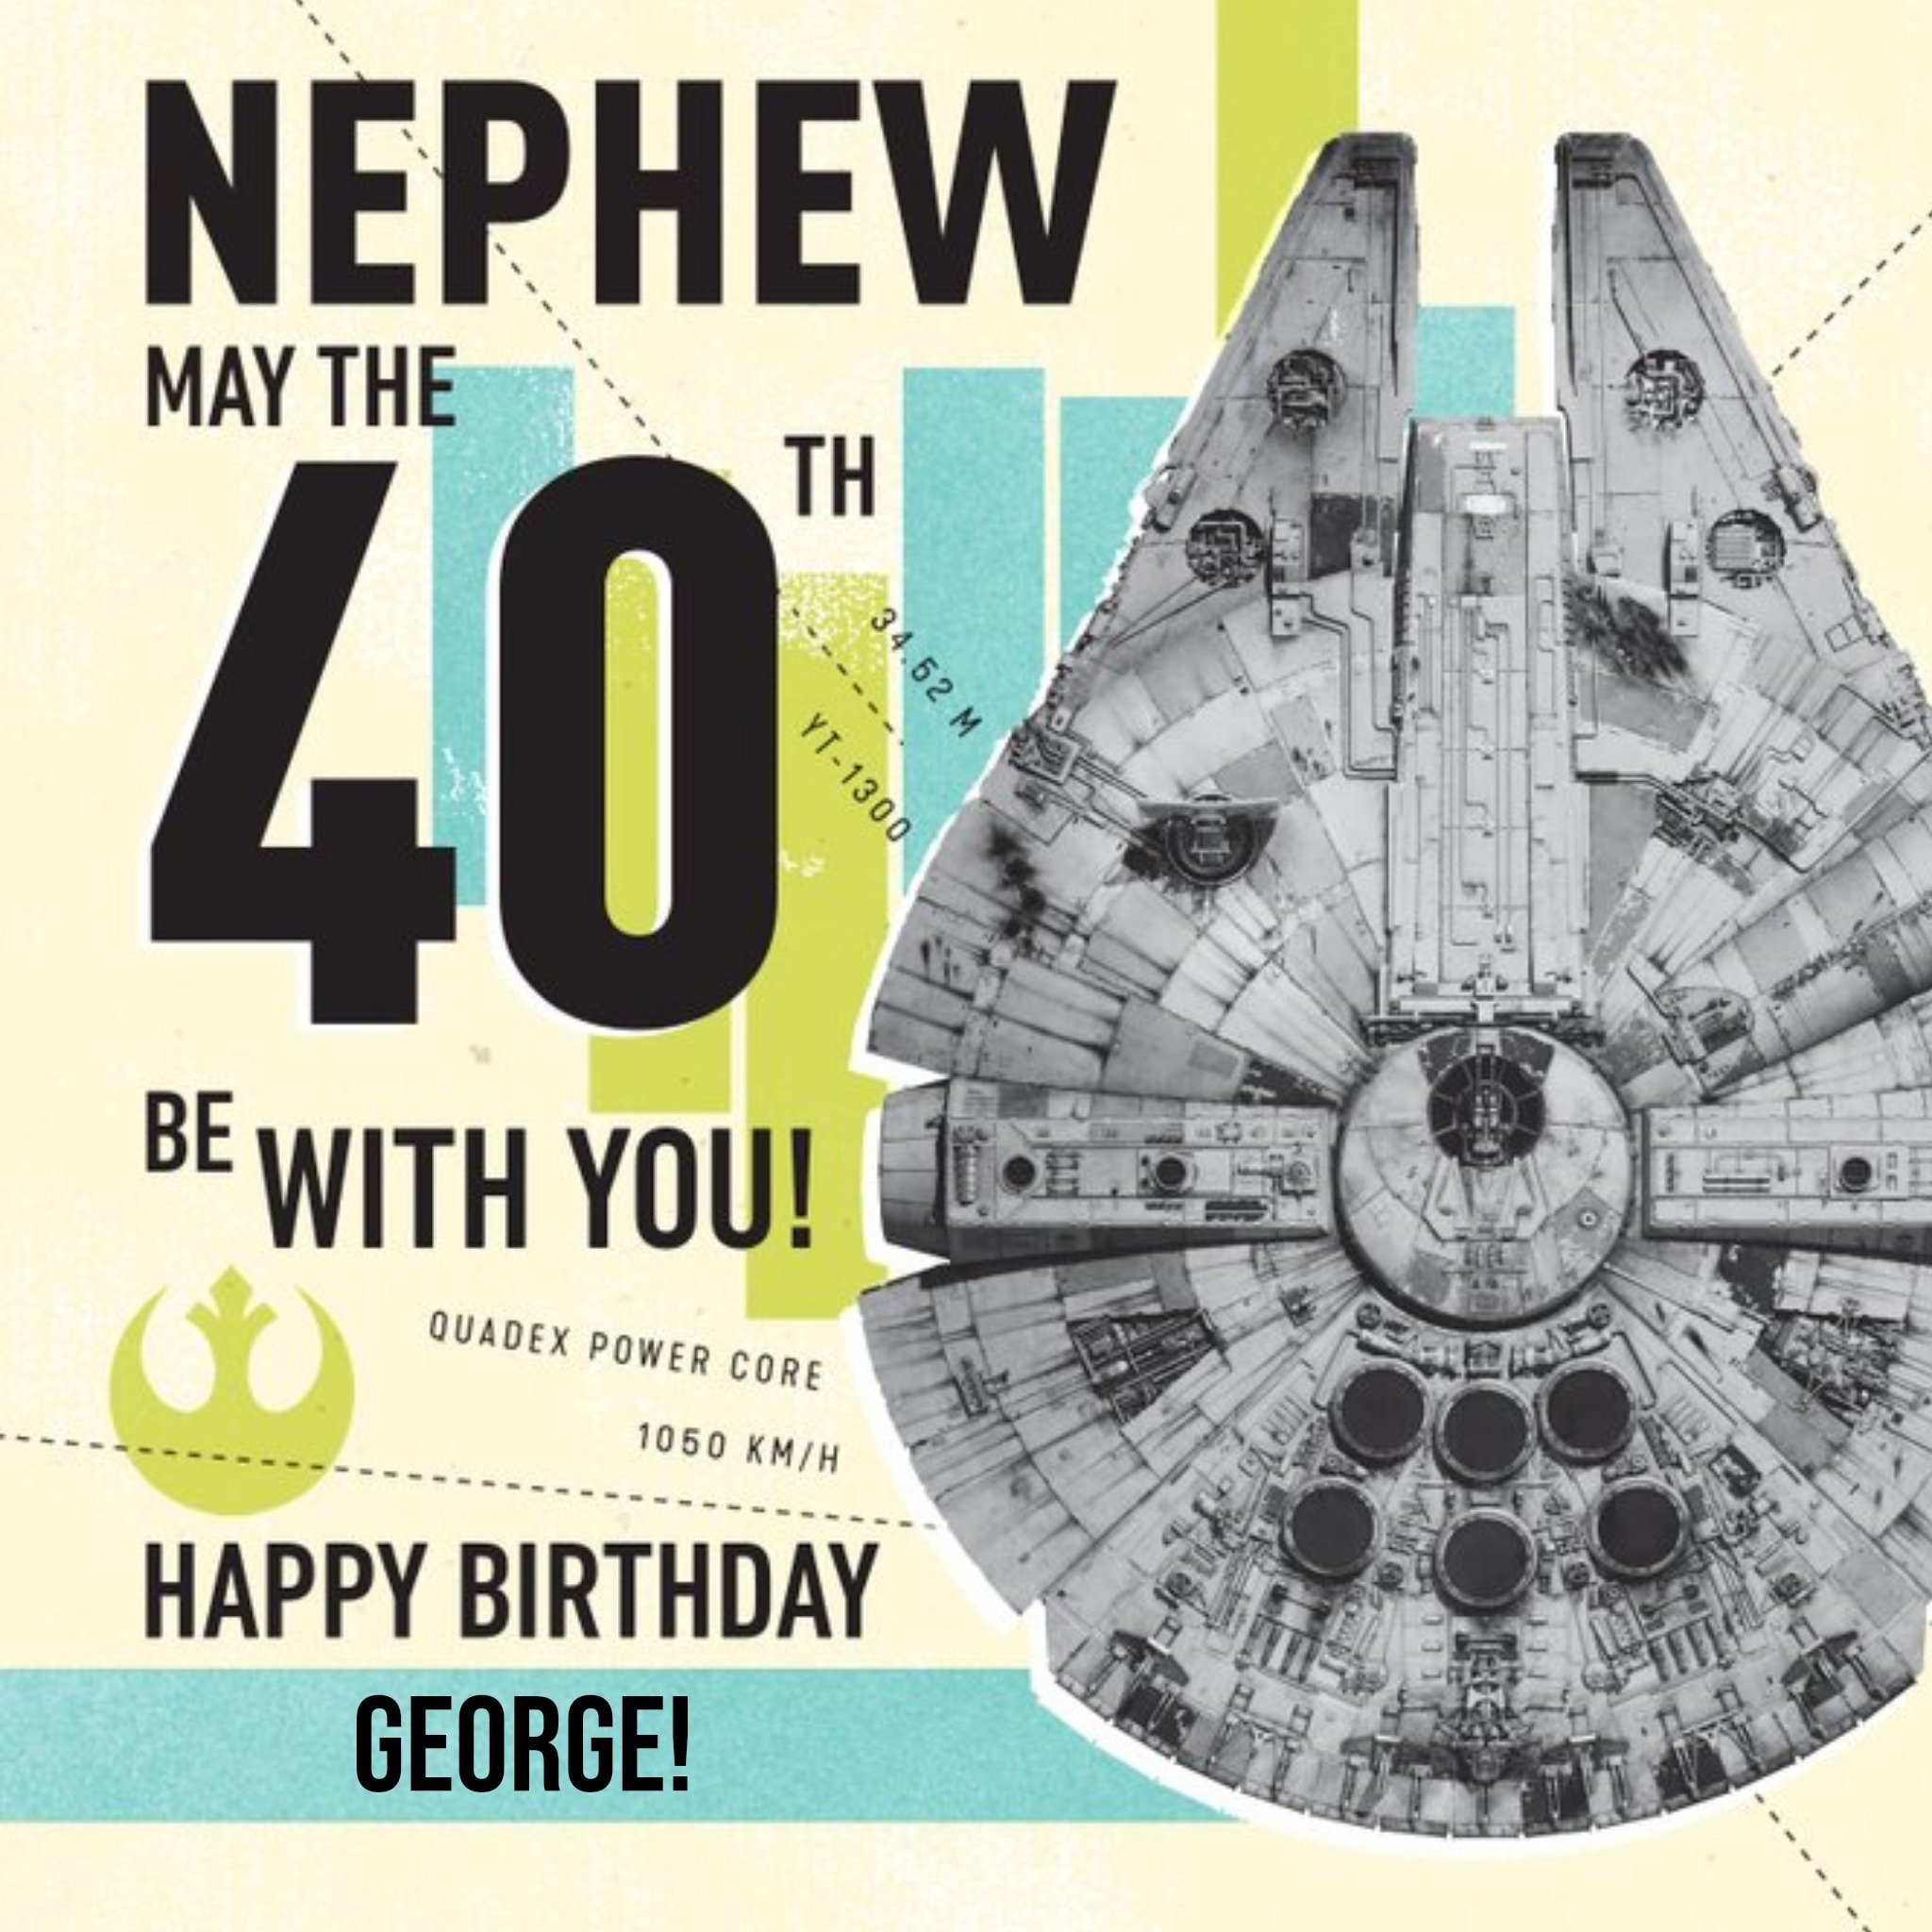 Disney Star Wars Millennium Falcon May the 40th Be With You Birthday Card For Nephew, Large